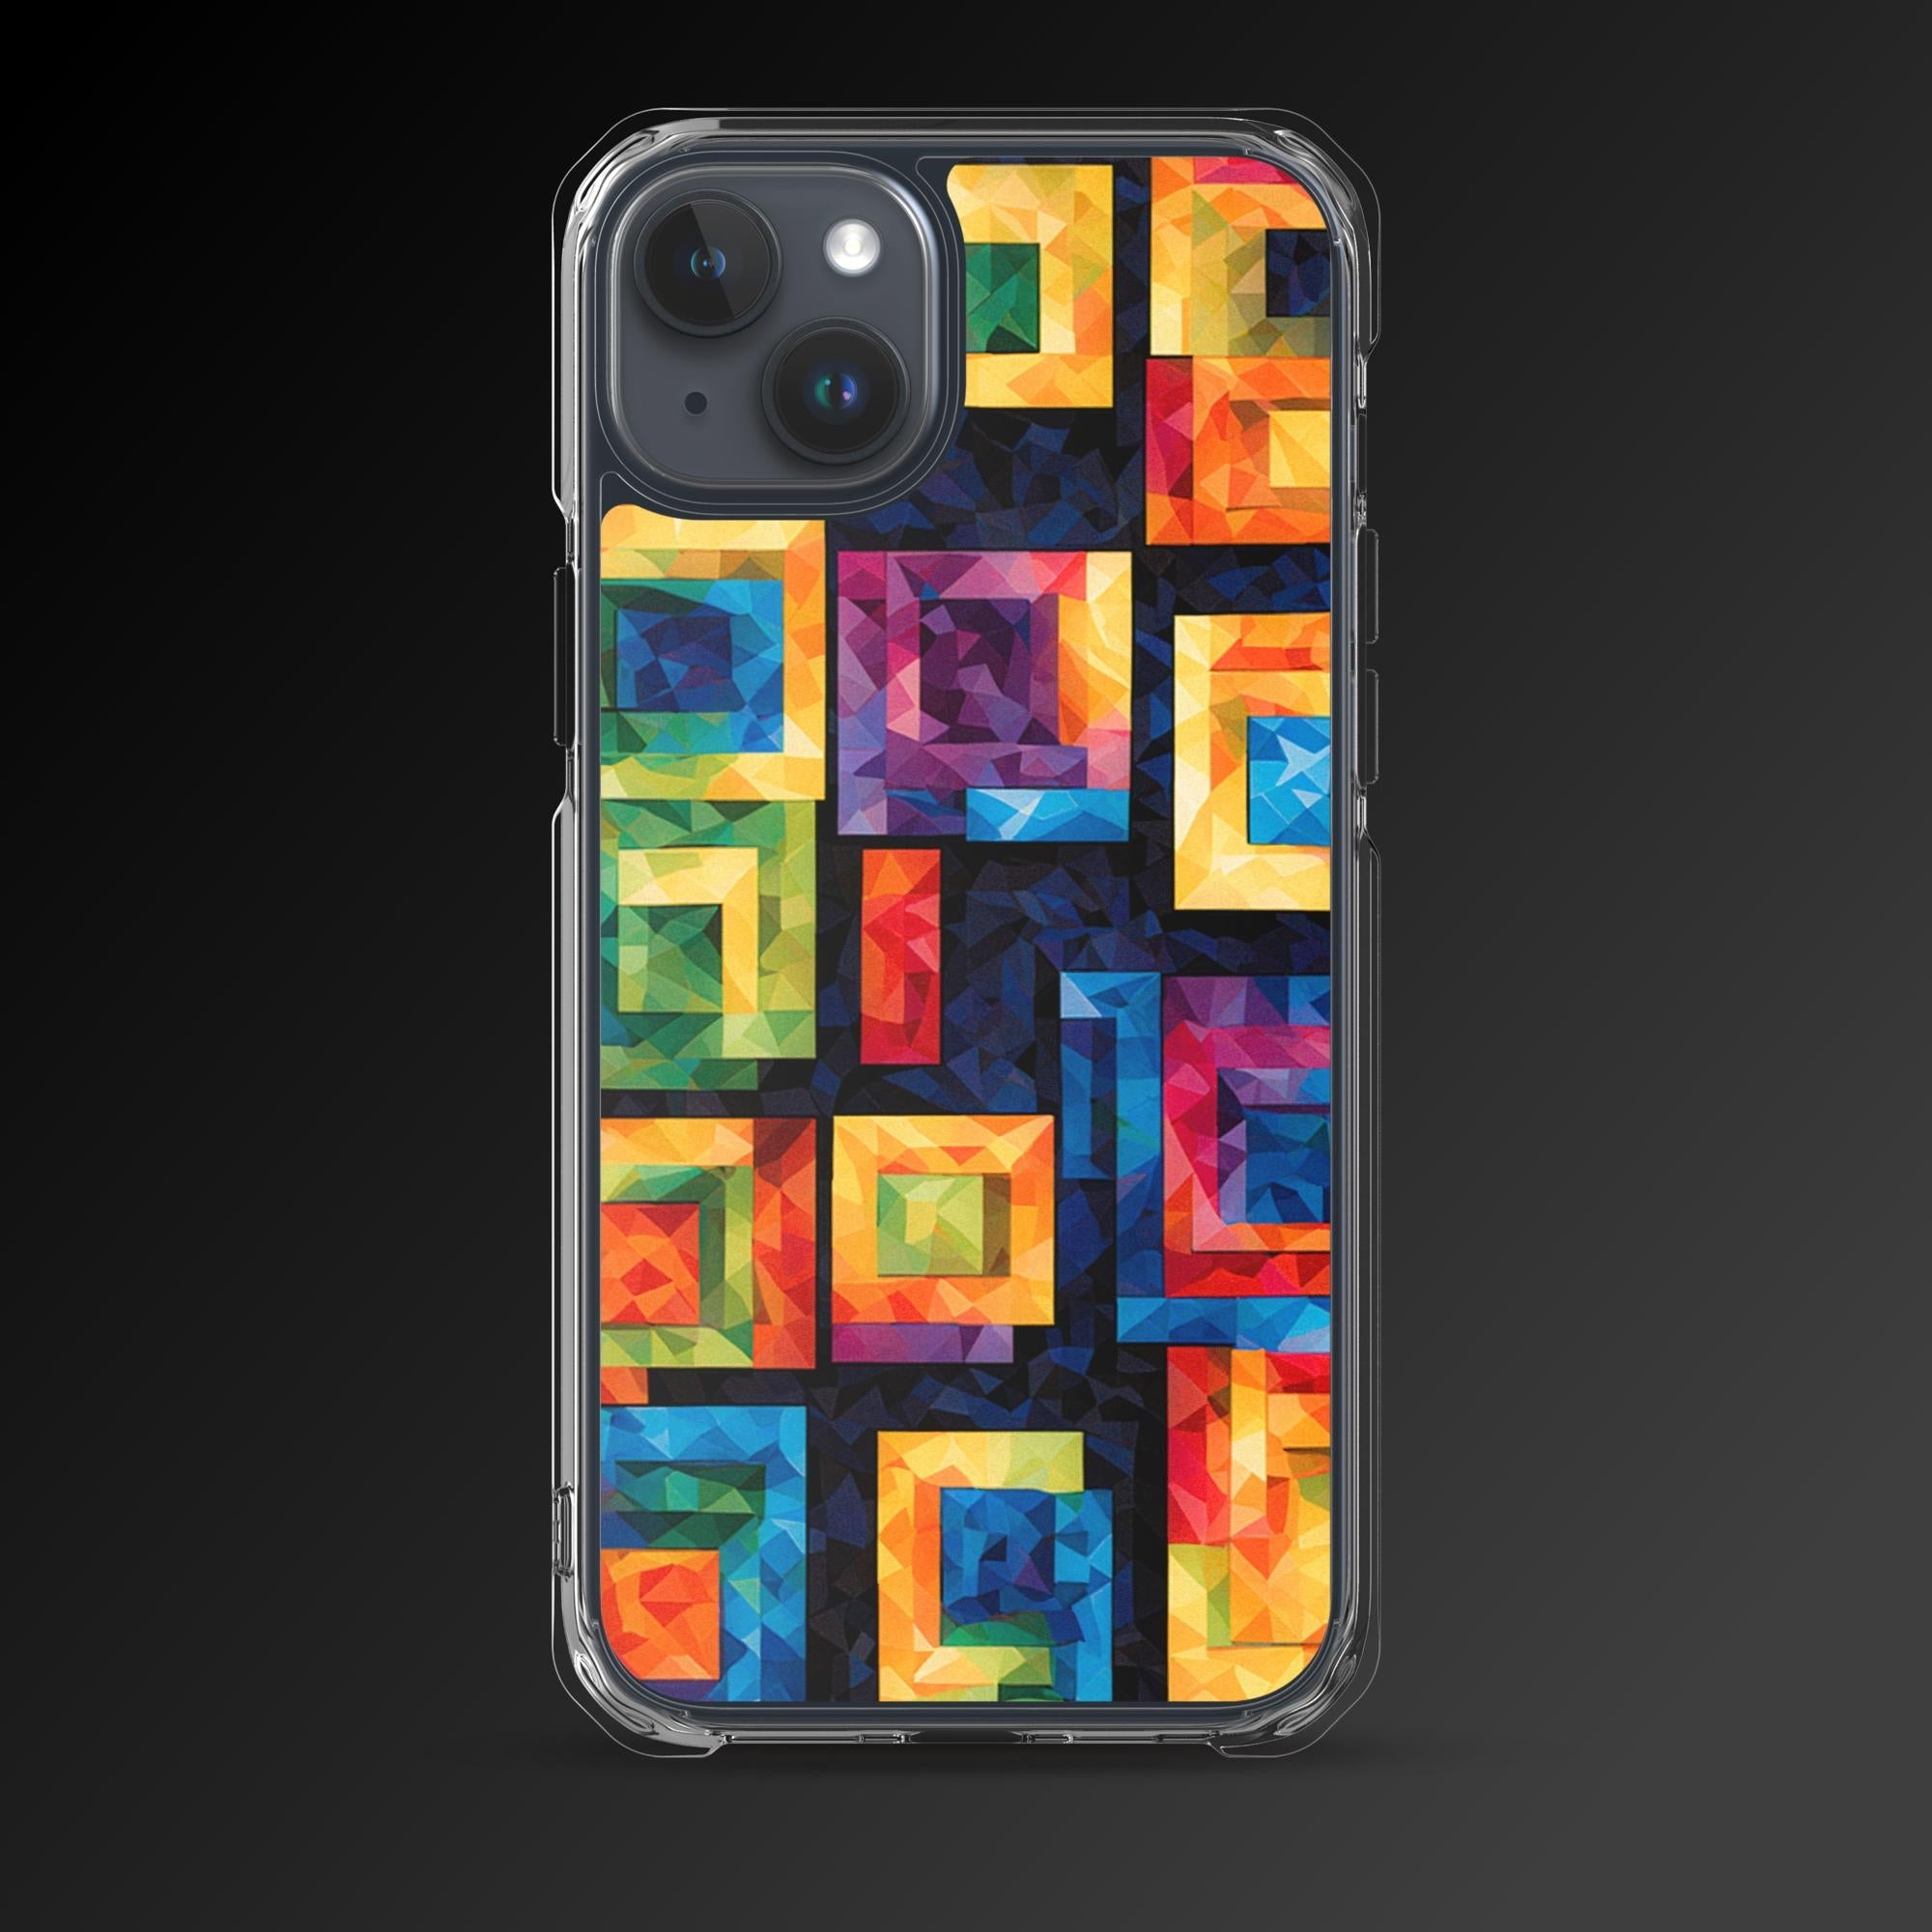 "Many forms" clear iphone case - Clear iphone case - Ever colorful